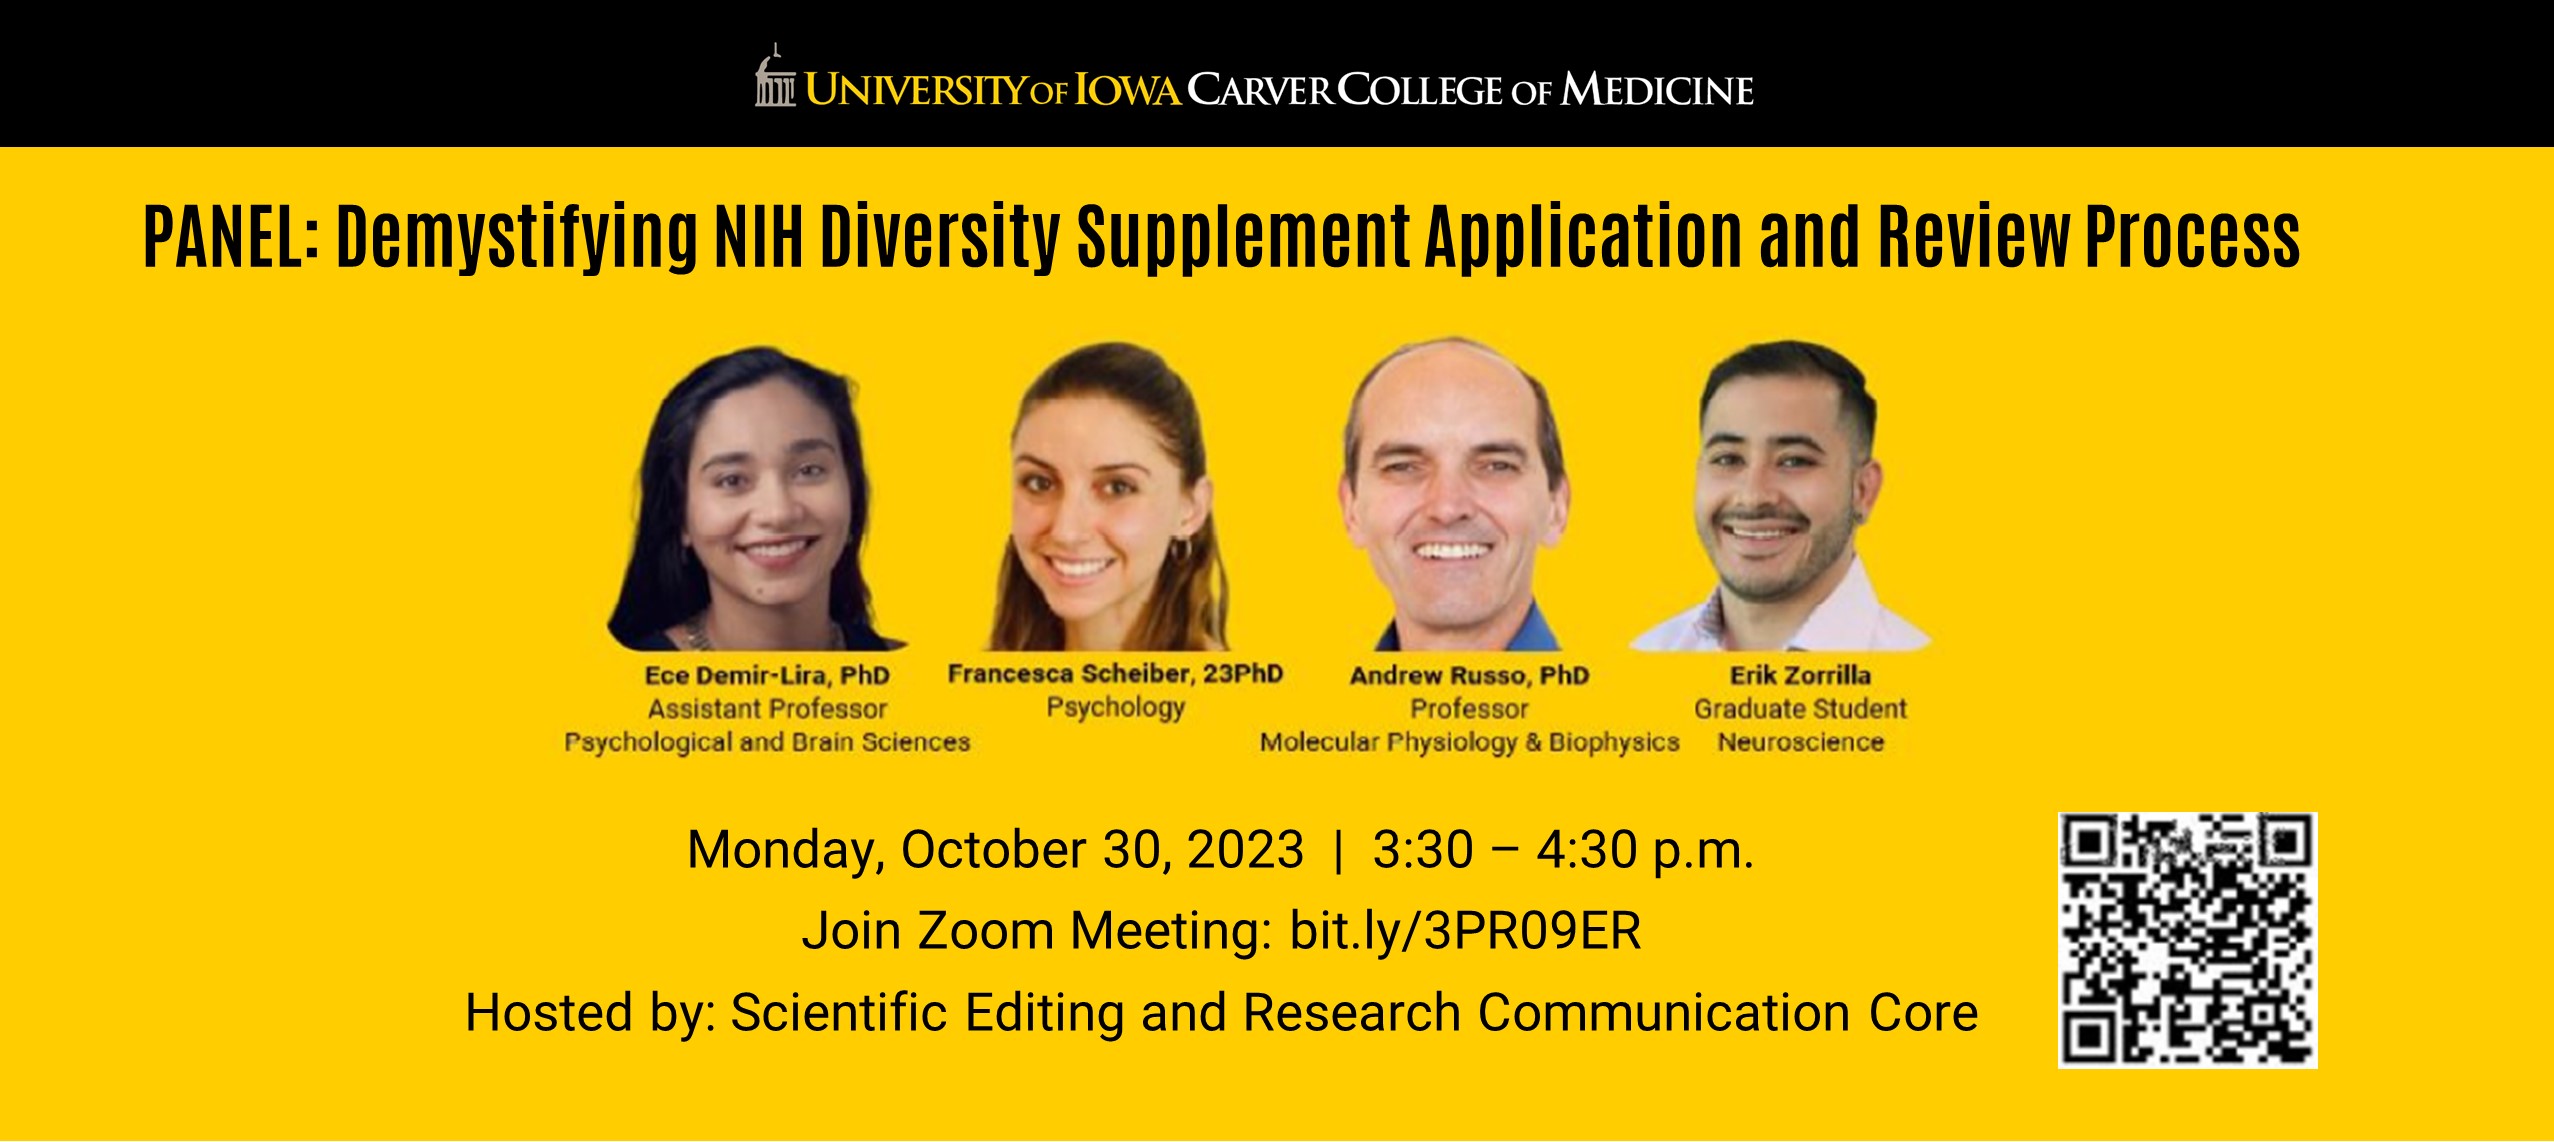 2023.10.30 PANEL Demystifying the NIH Diversity Supplement Application and Review Process Slide